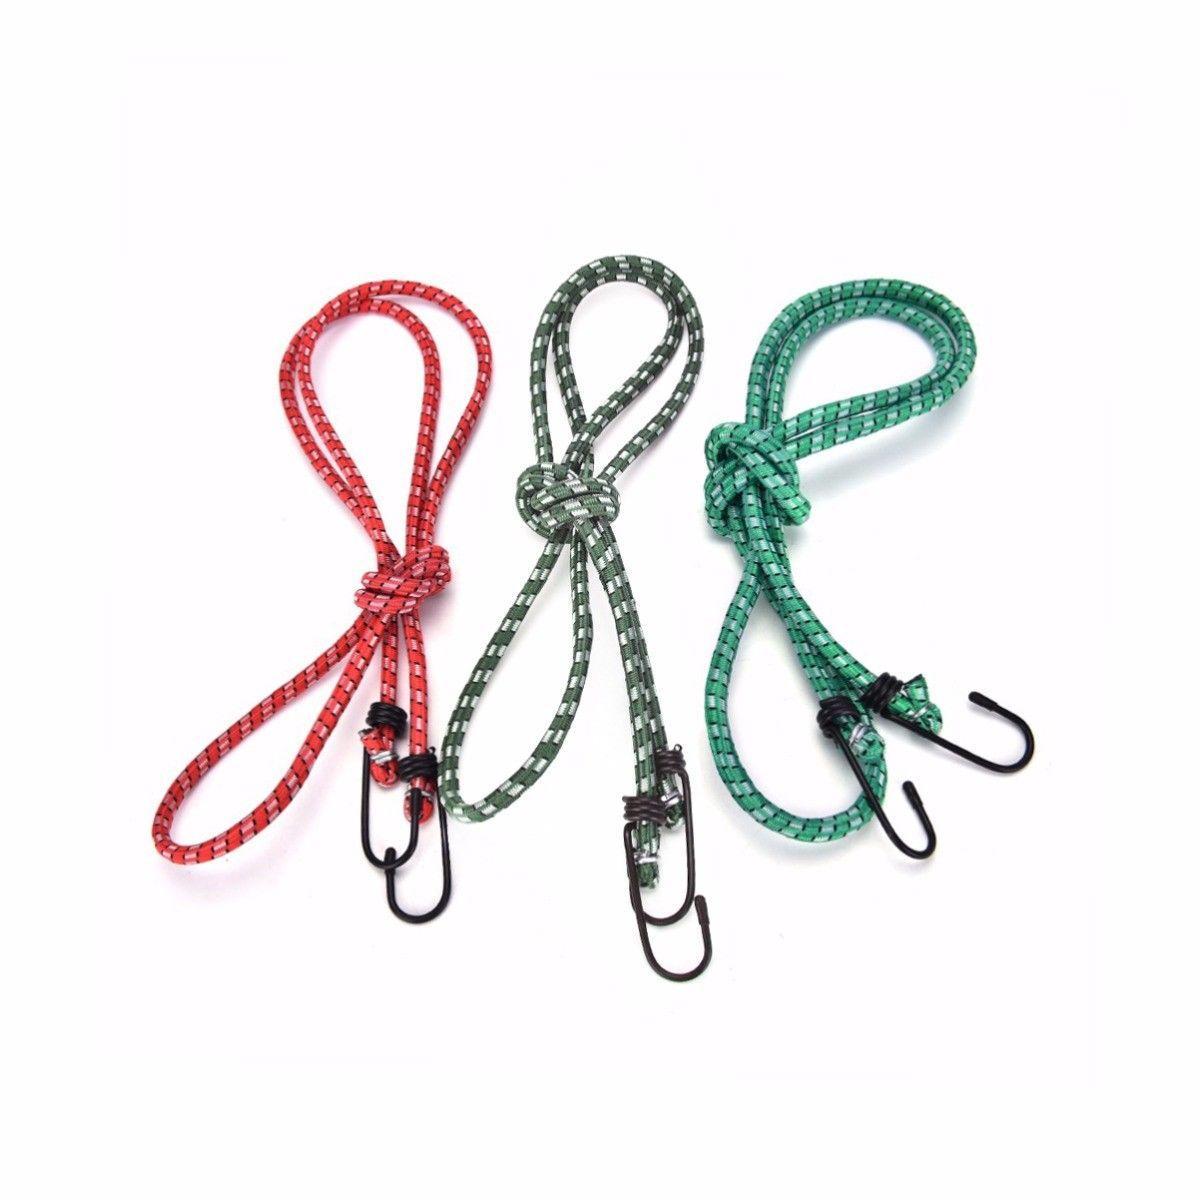 3 Pack Bungee Straps Cords Elastic Stretch Luggage Strap Rope Cord Ropes 90cm 3157 (Parcel Rate)